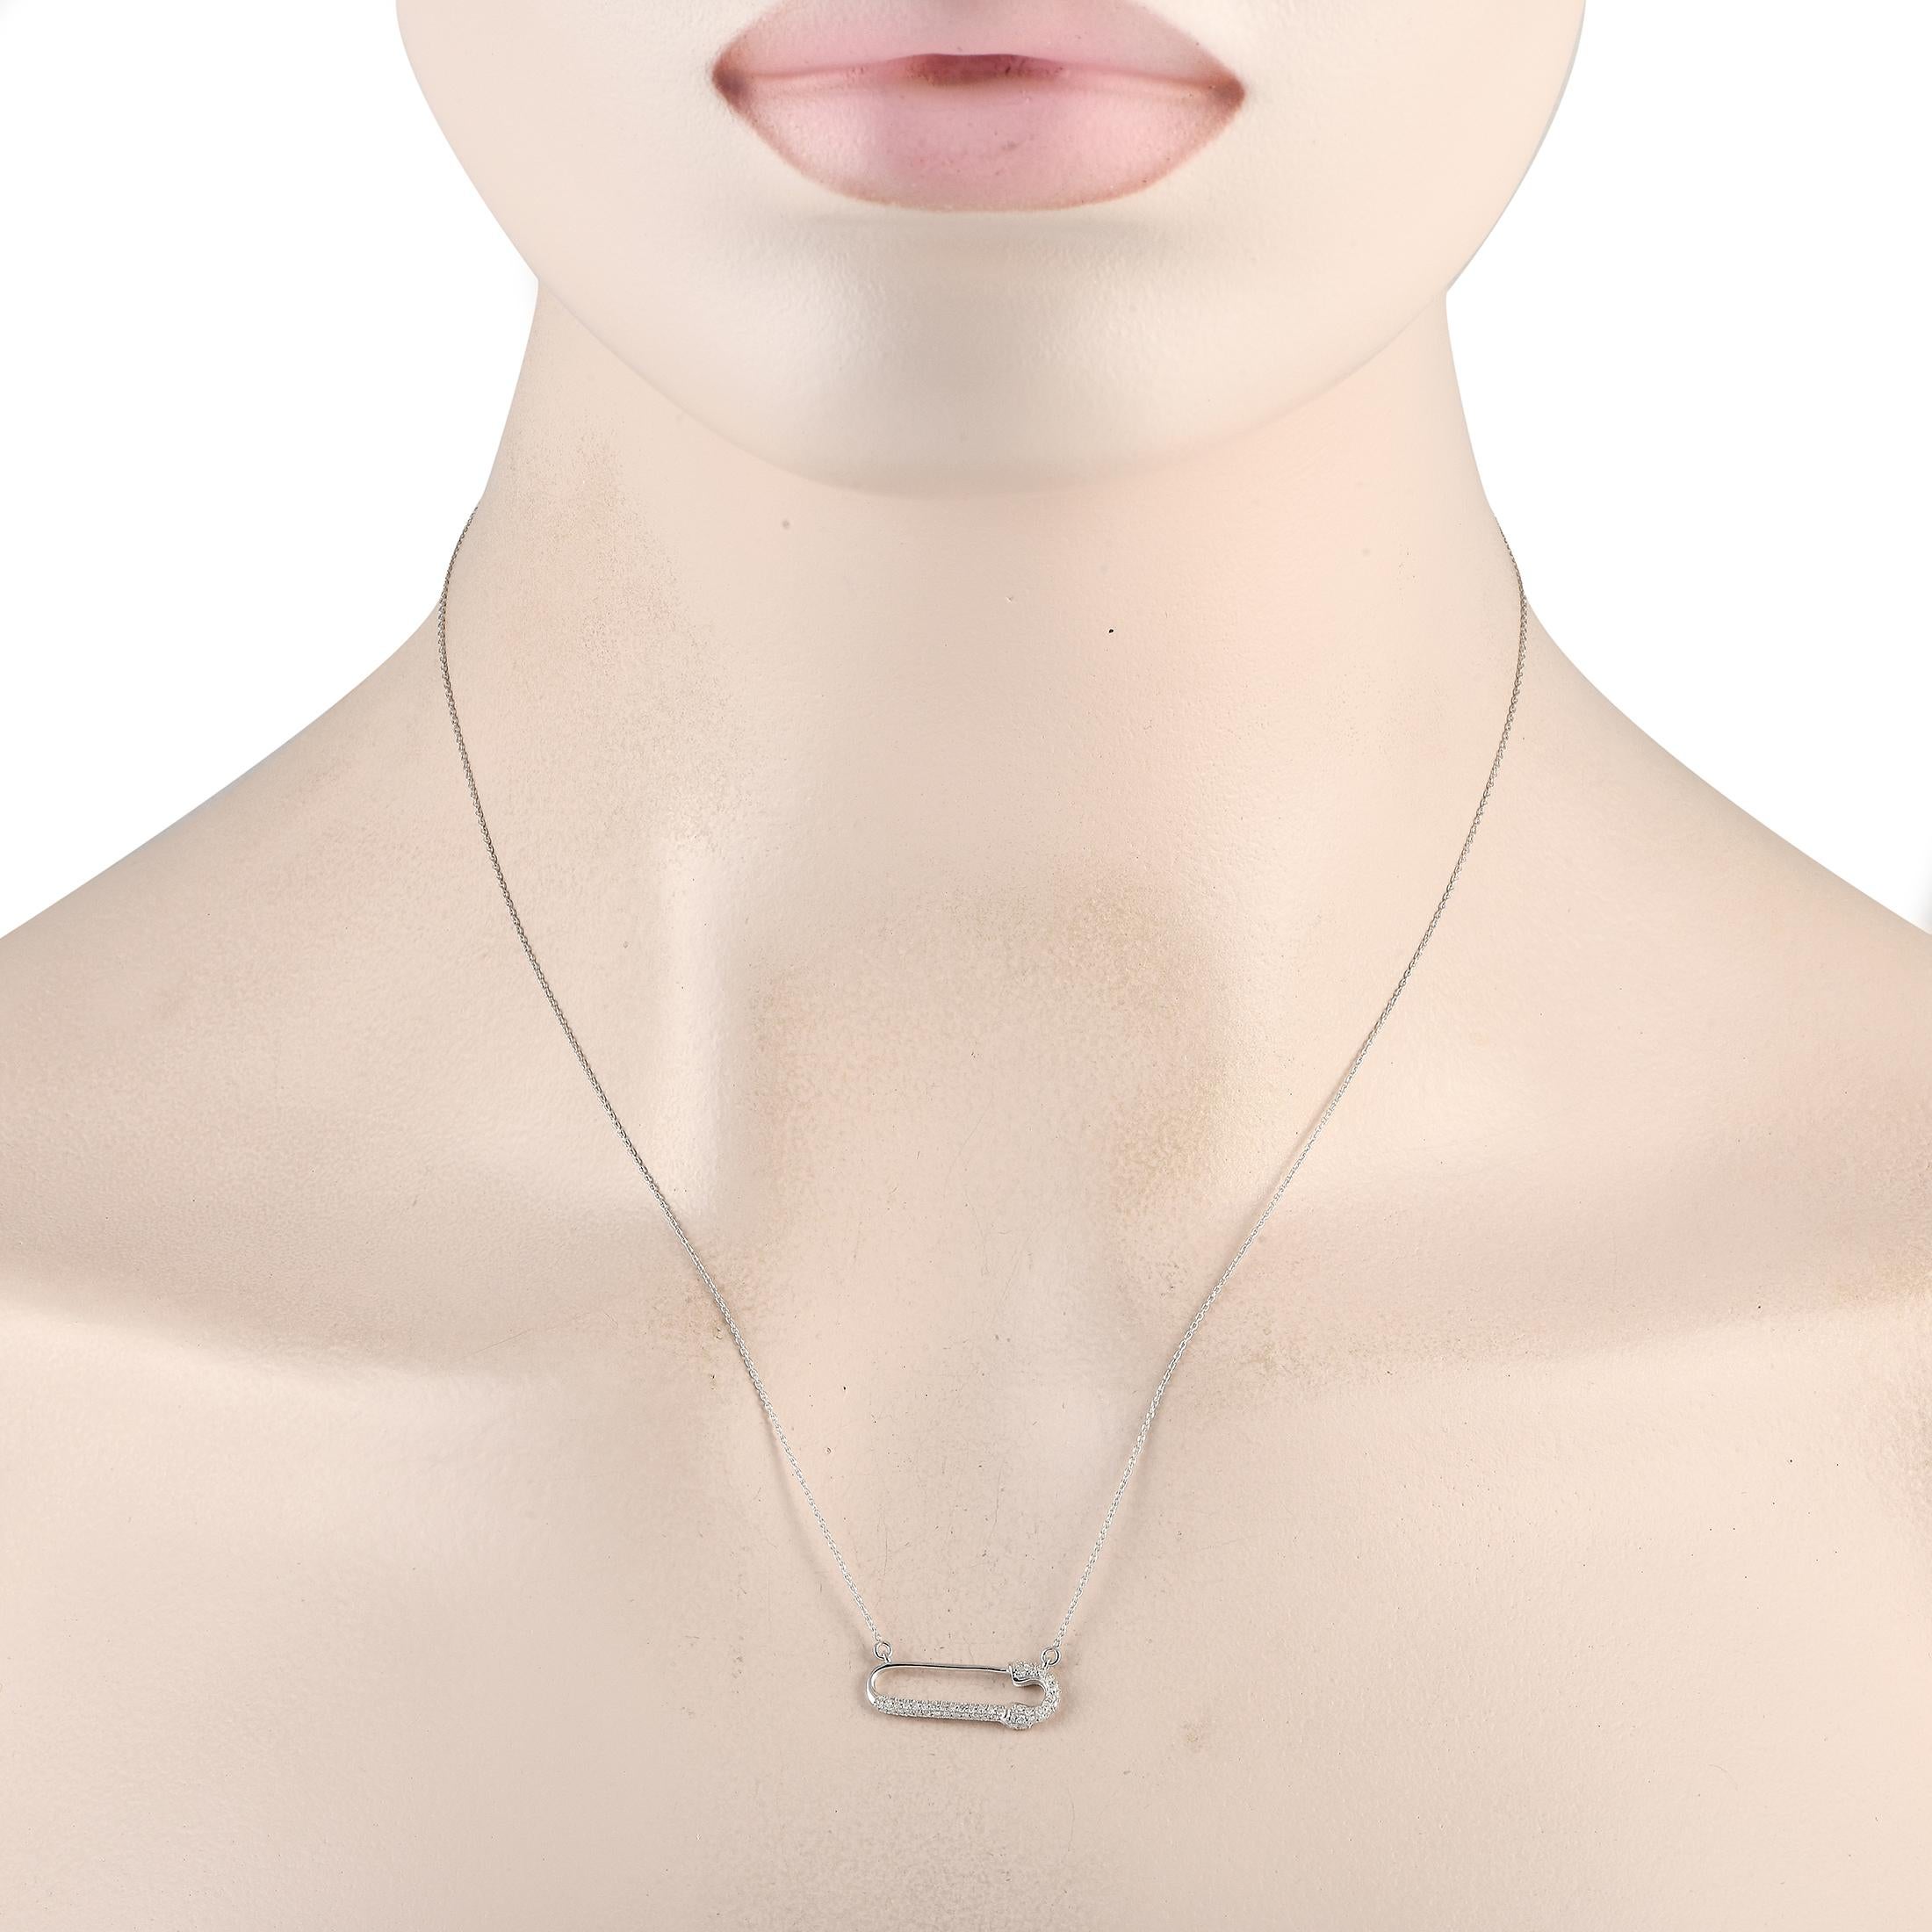 This exquisite necklace has a chic, contemporary sense of style. Suspended at the center of an 18 chain, youll find a safety pin shaped pendant measuring 0.25 long by 0.75 wide. This piece is crafted from 14K white gold and features diamonds with a